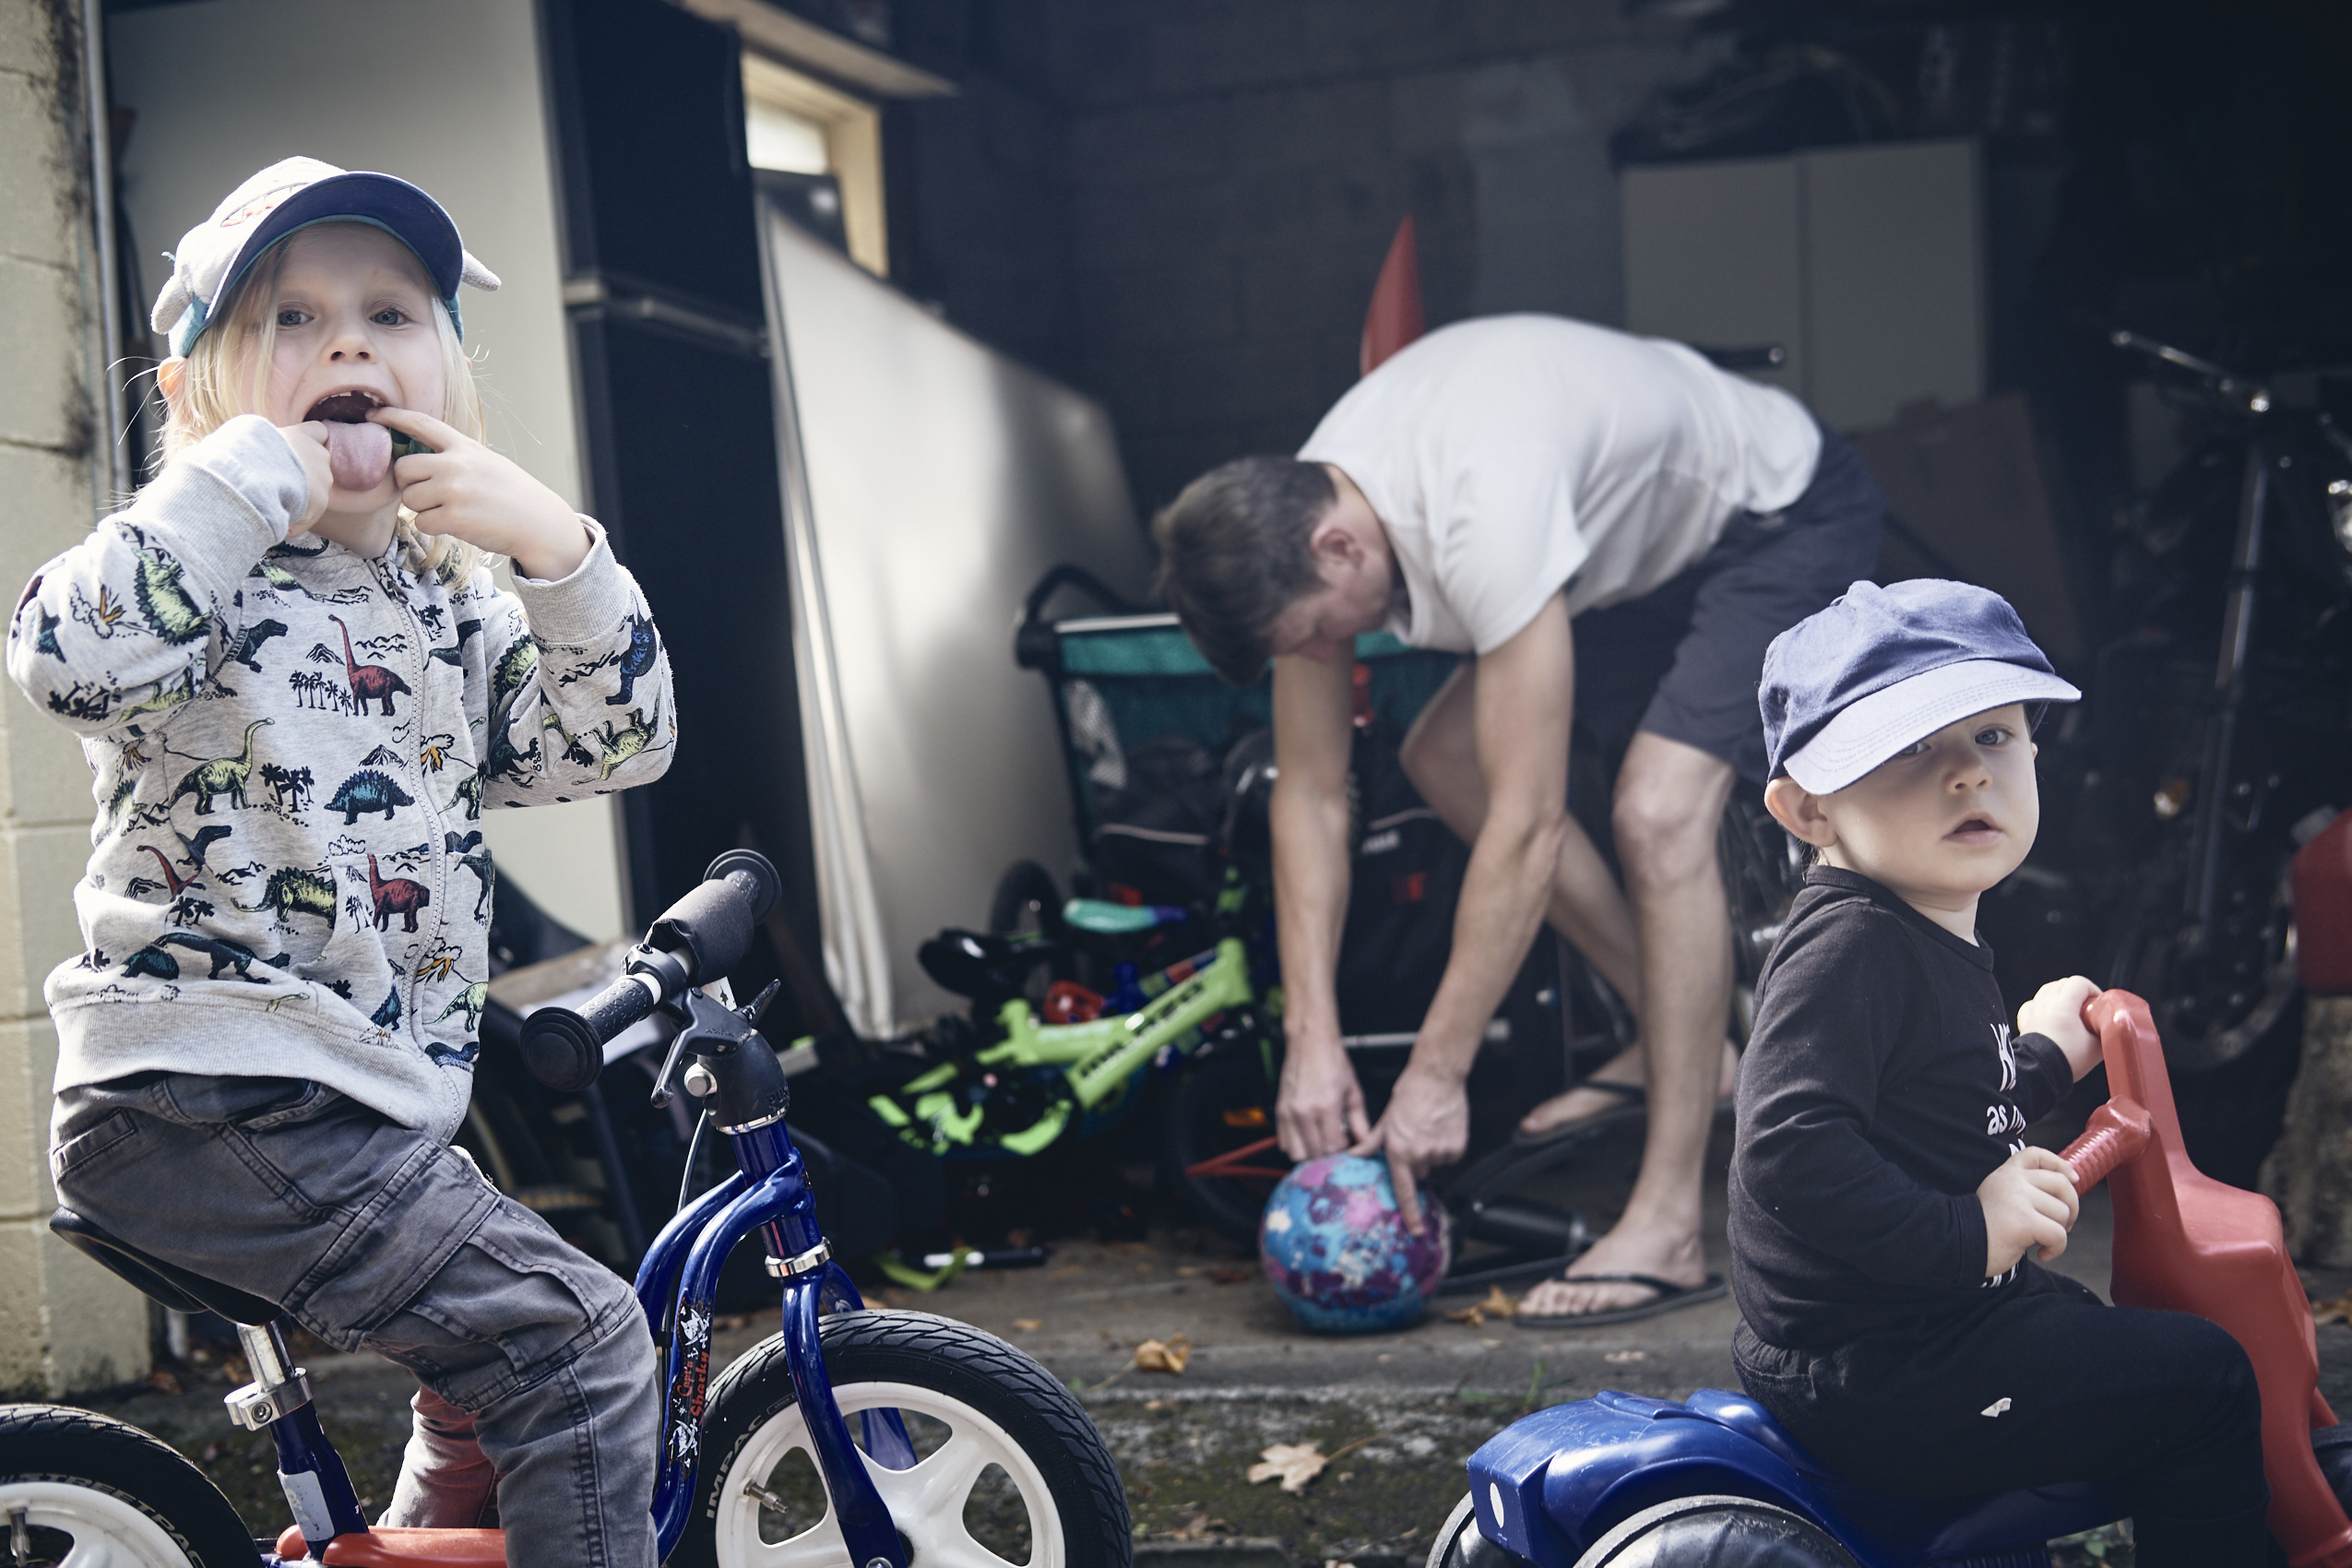 Lockdown • Outdoor Family Time with Balls & Bikes • Lifestyle & Portrait Photography